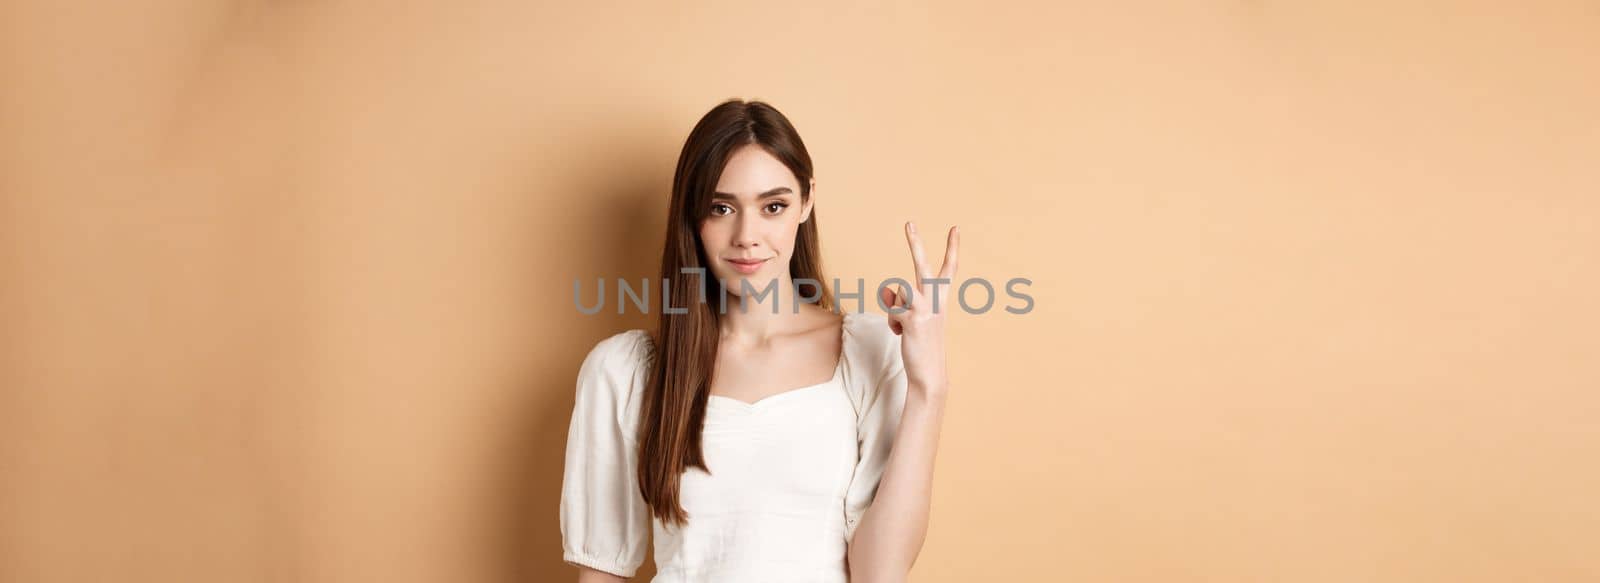 Attractive young woman show fingers number two, smiling and looking confident, standing on beige background.